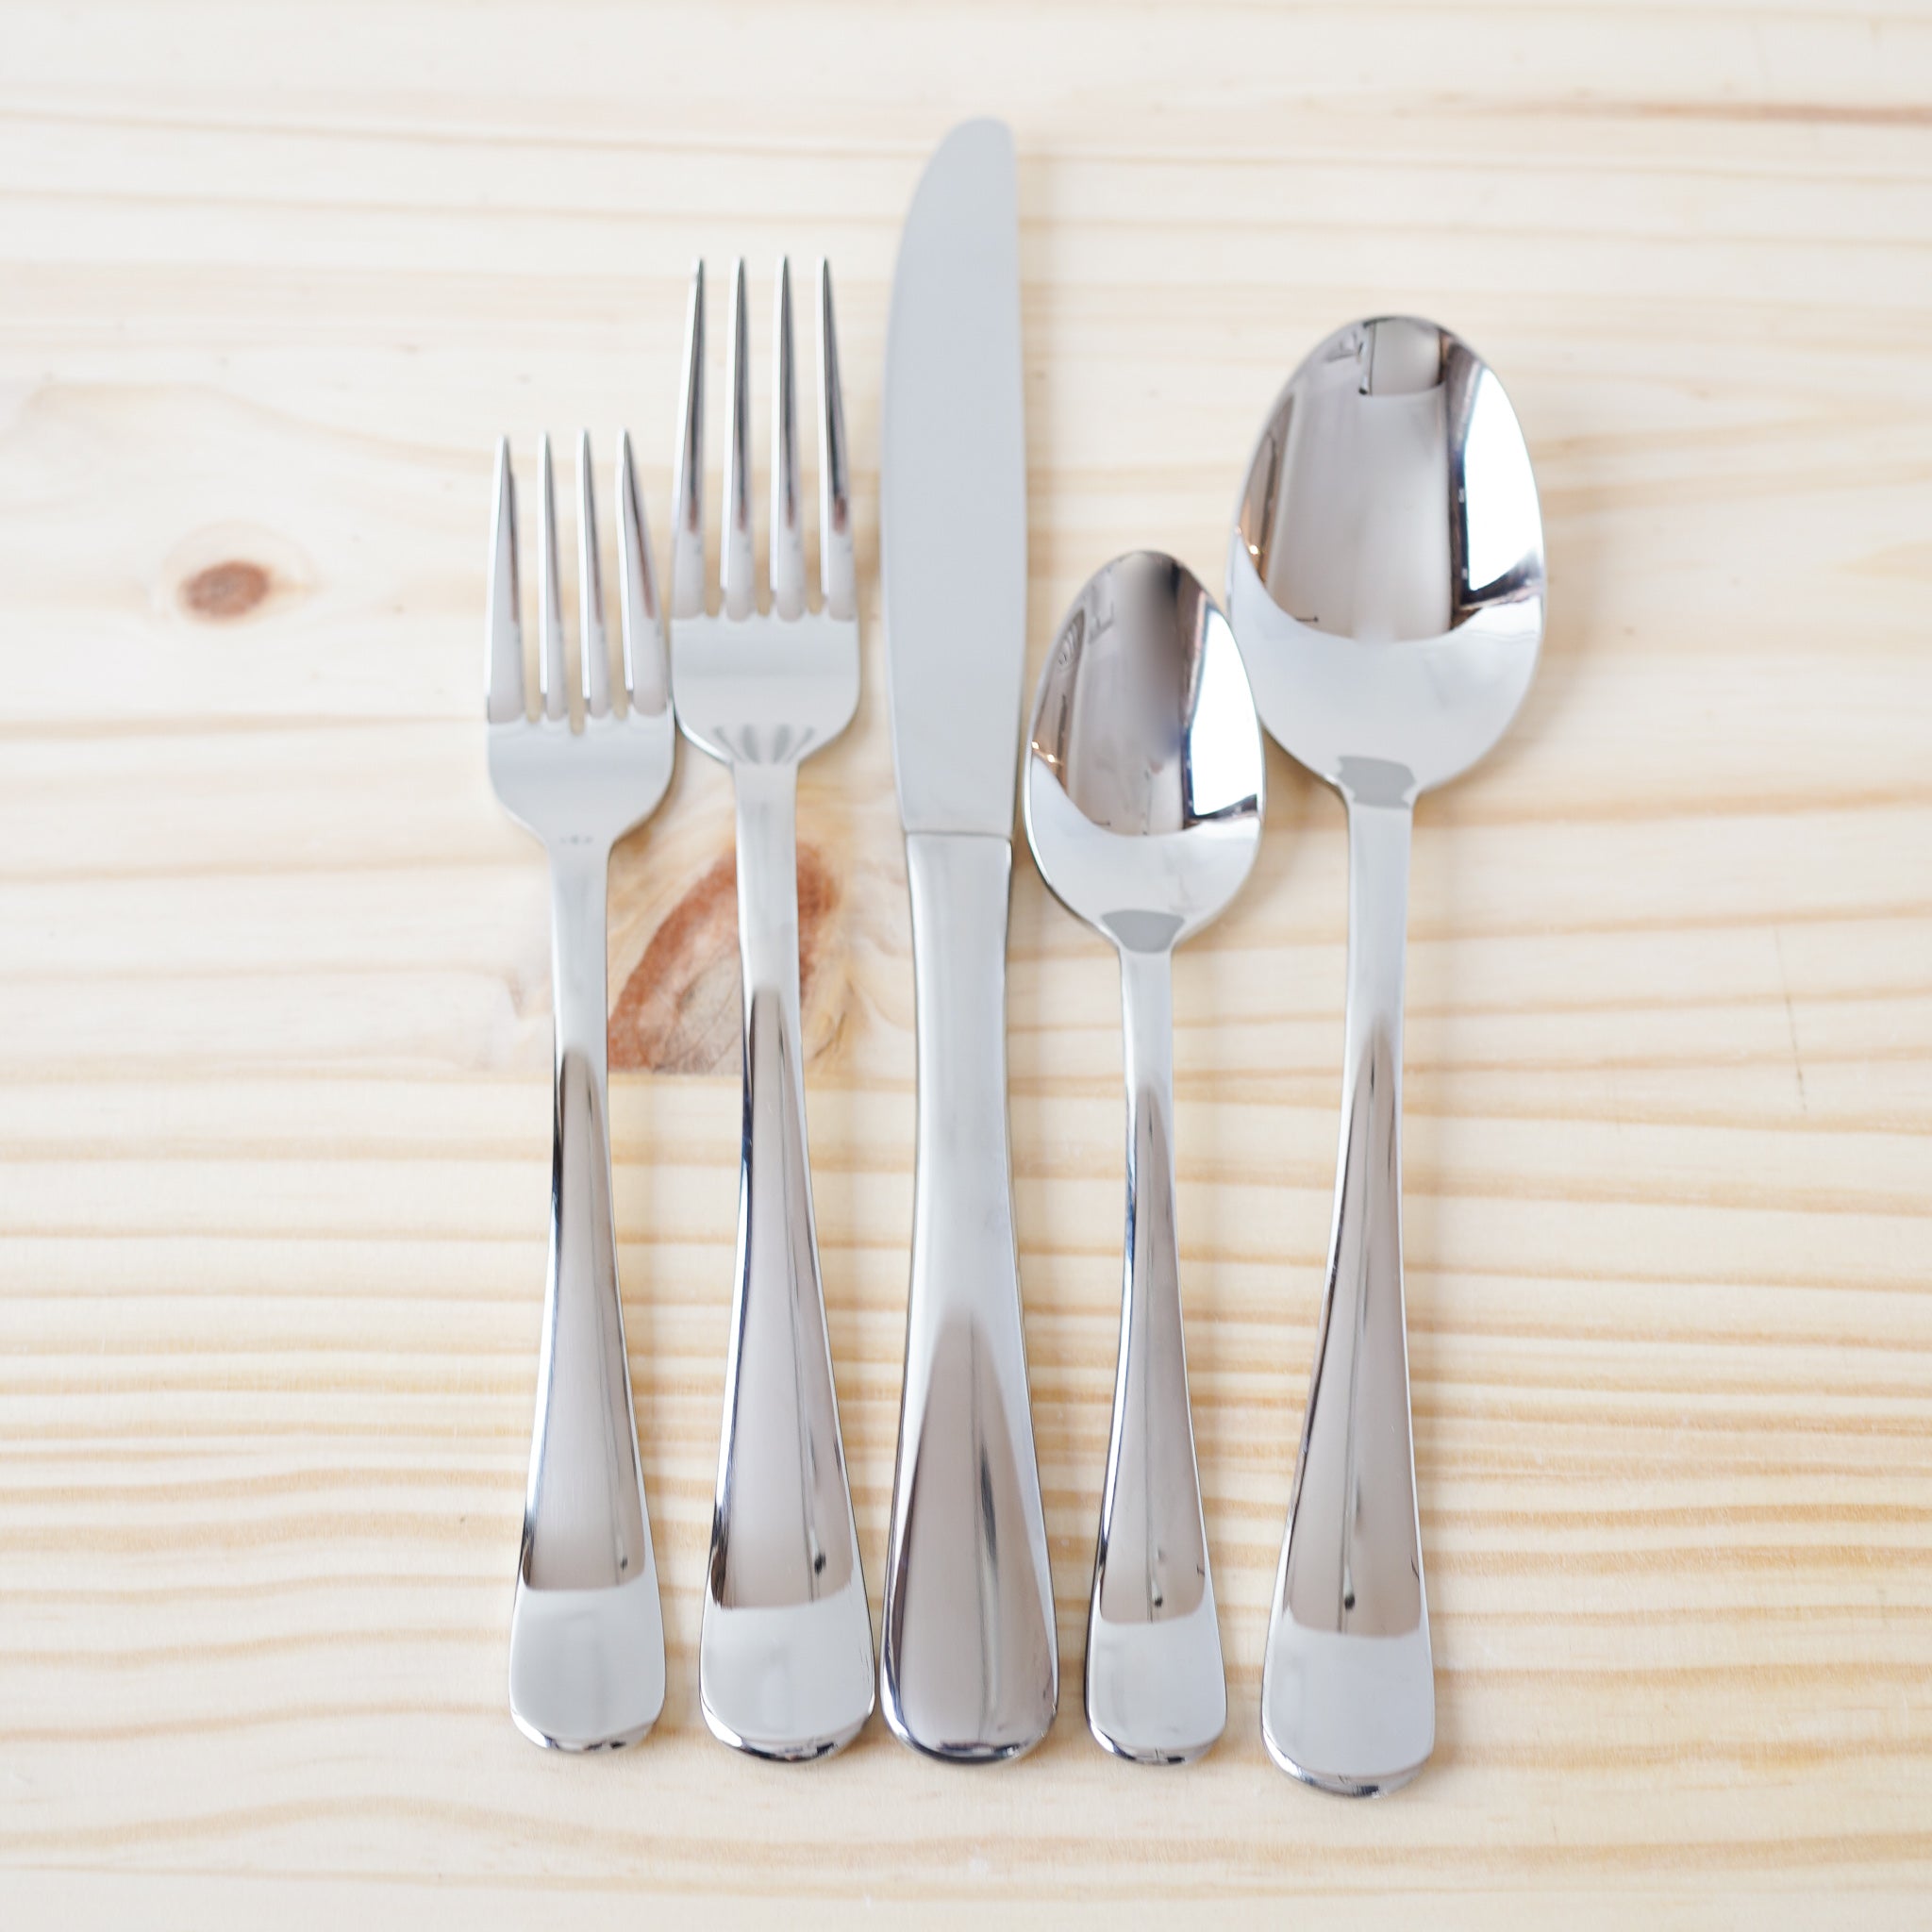 Country Cutlery - 20pc Set